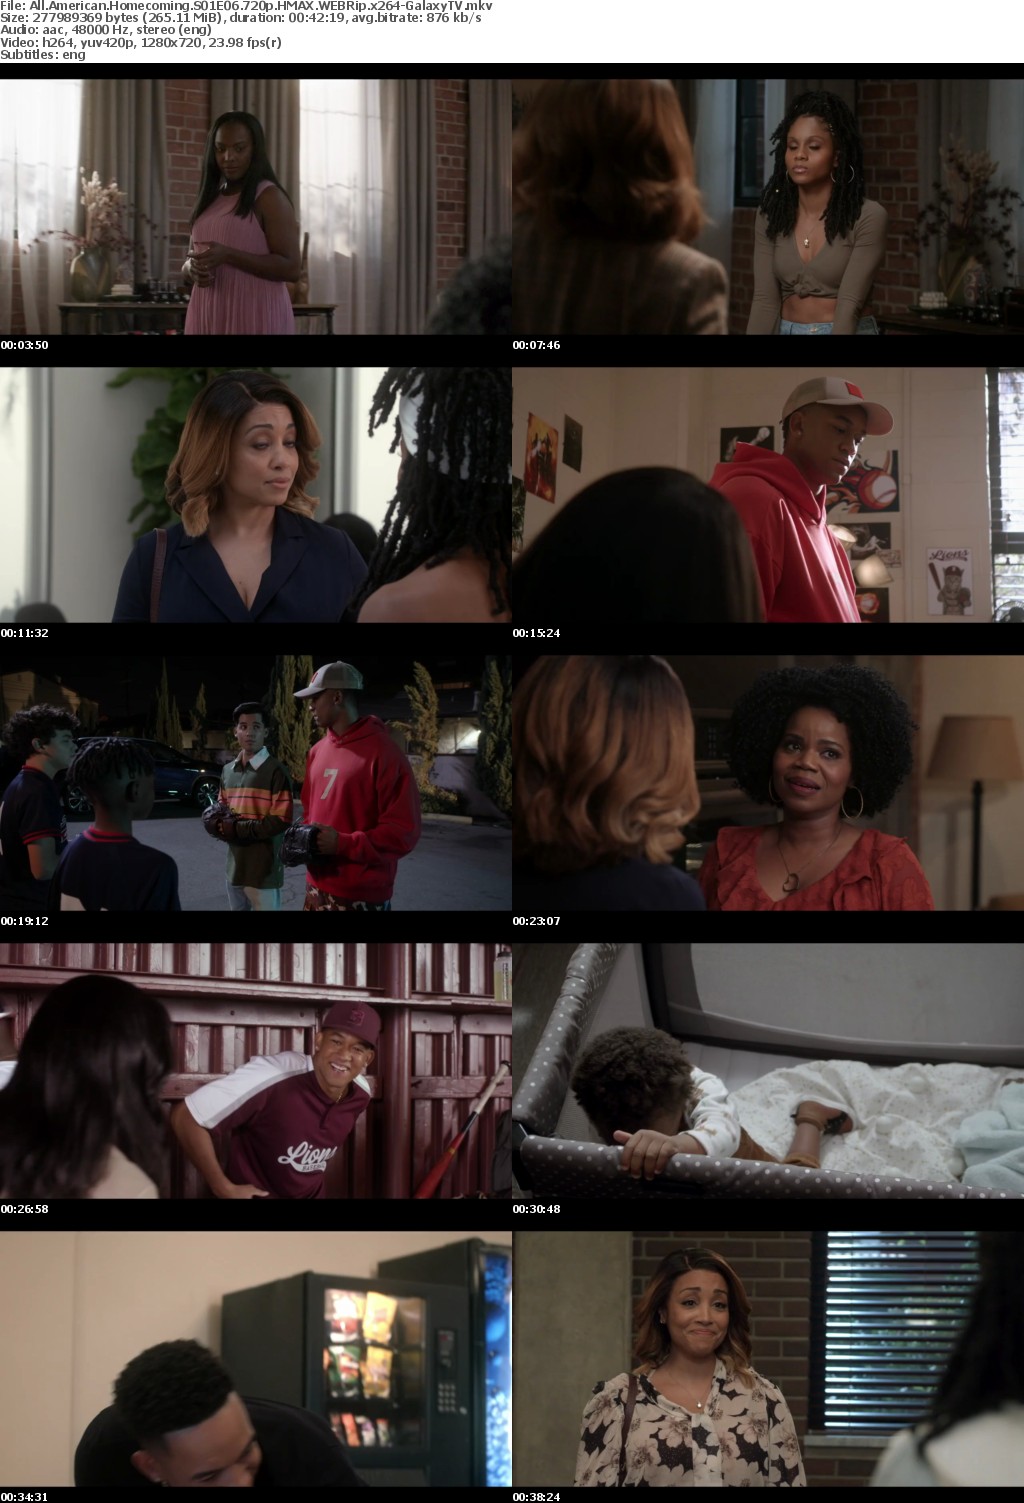 All American Homecoming S01 COMPLETE 720p HMAX WEBRip x264-GalaxyTV